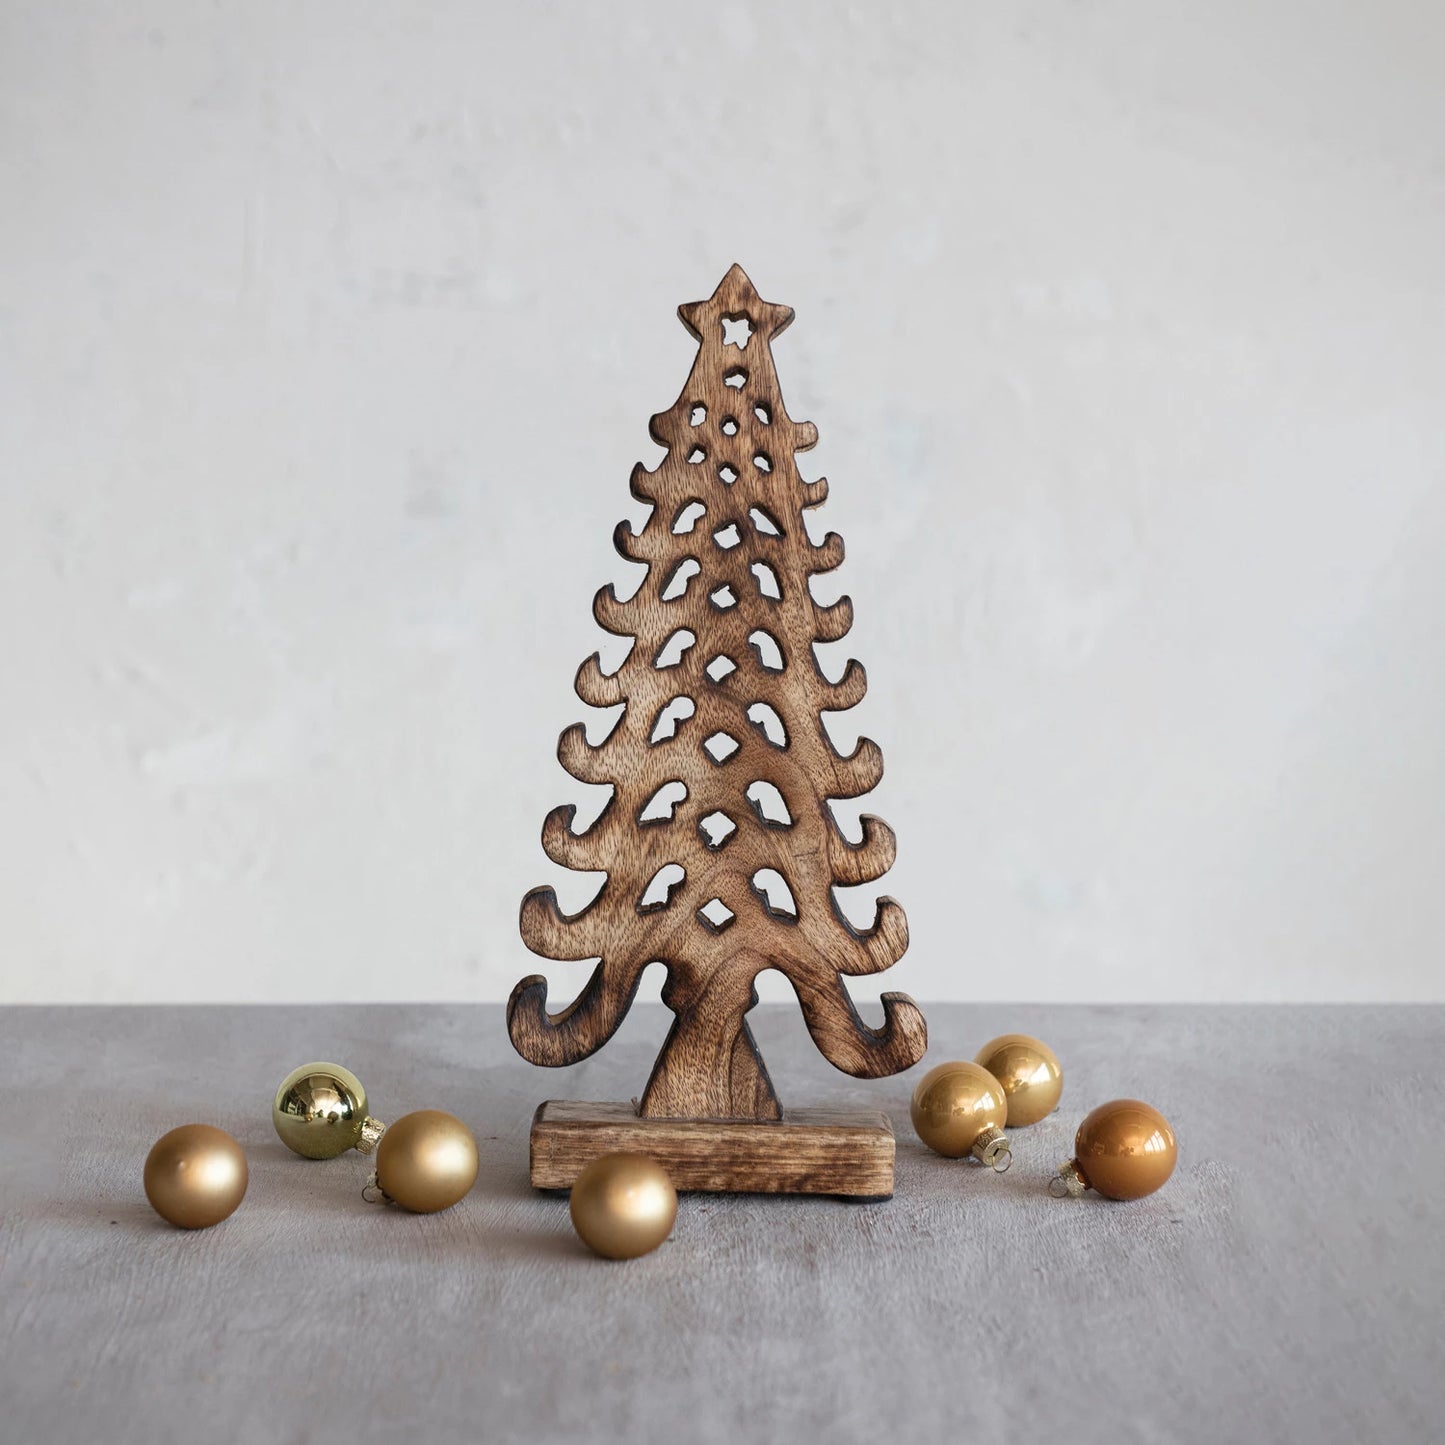 cut-out wooden tree standing on a grey table with gold ornament balls scattered around.